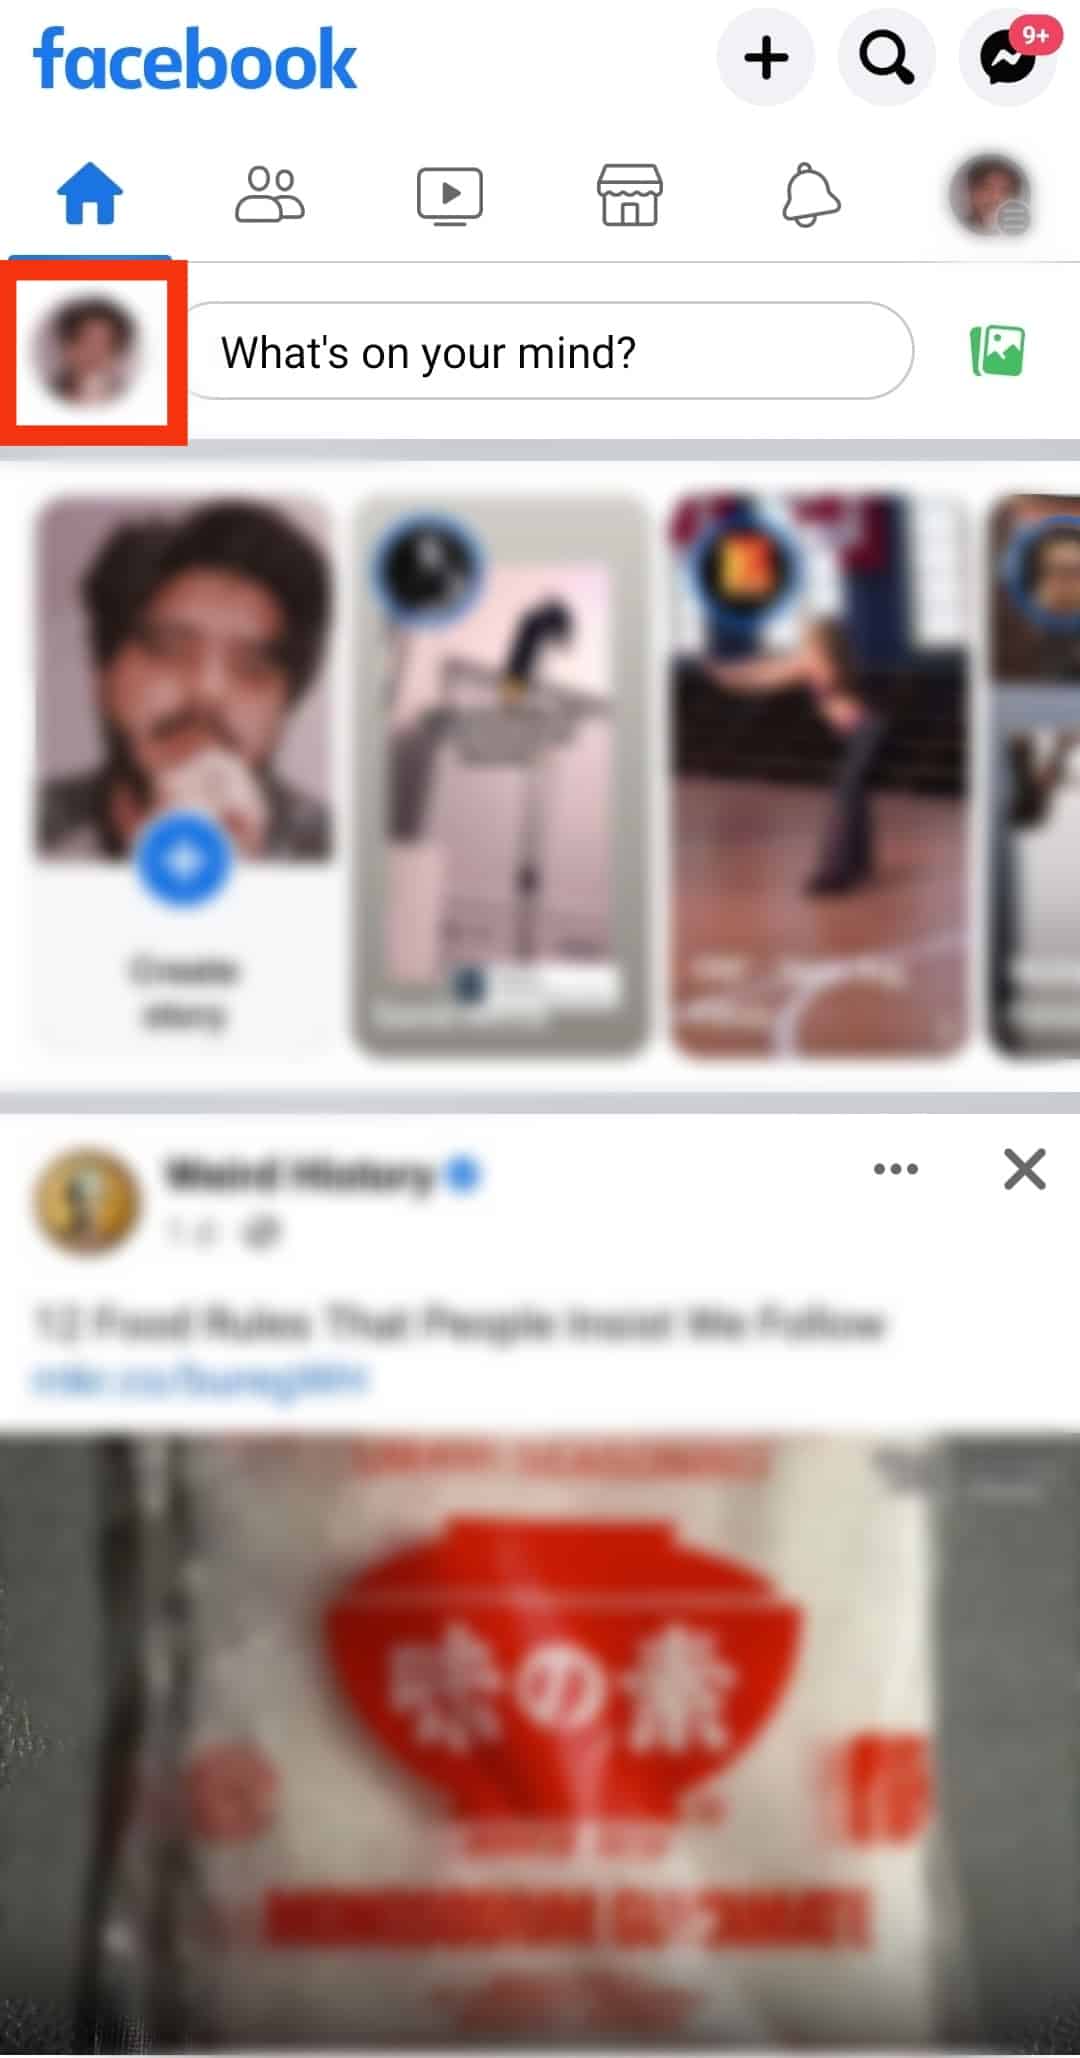 Tap On Your Profile Picture In The Top Left Corner